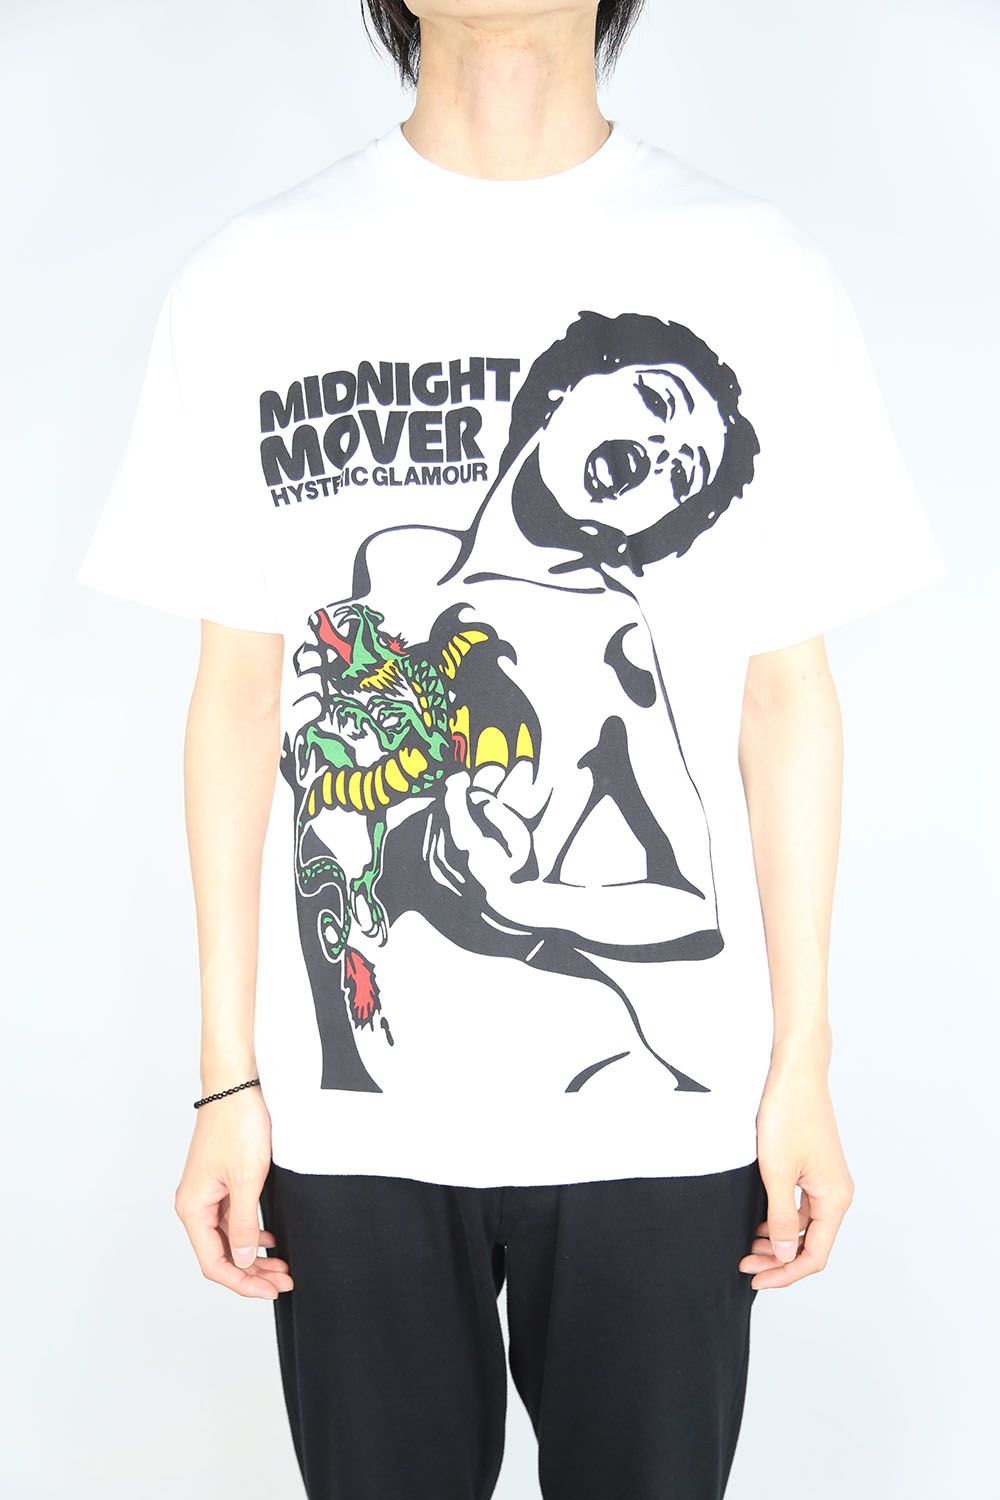 HYSTERIC GLAMOUR - MIDNIGHT MOVER Tシャツ / チャコール | Tempt